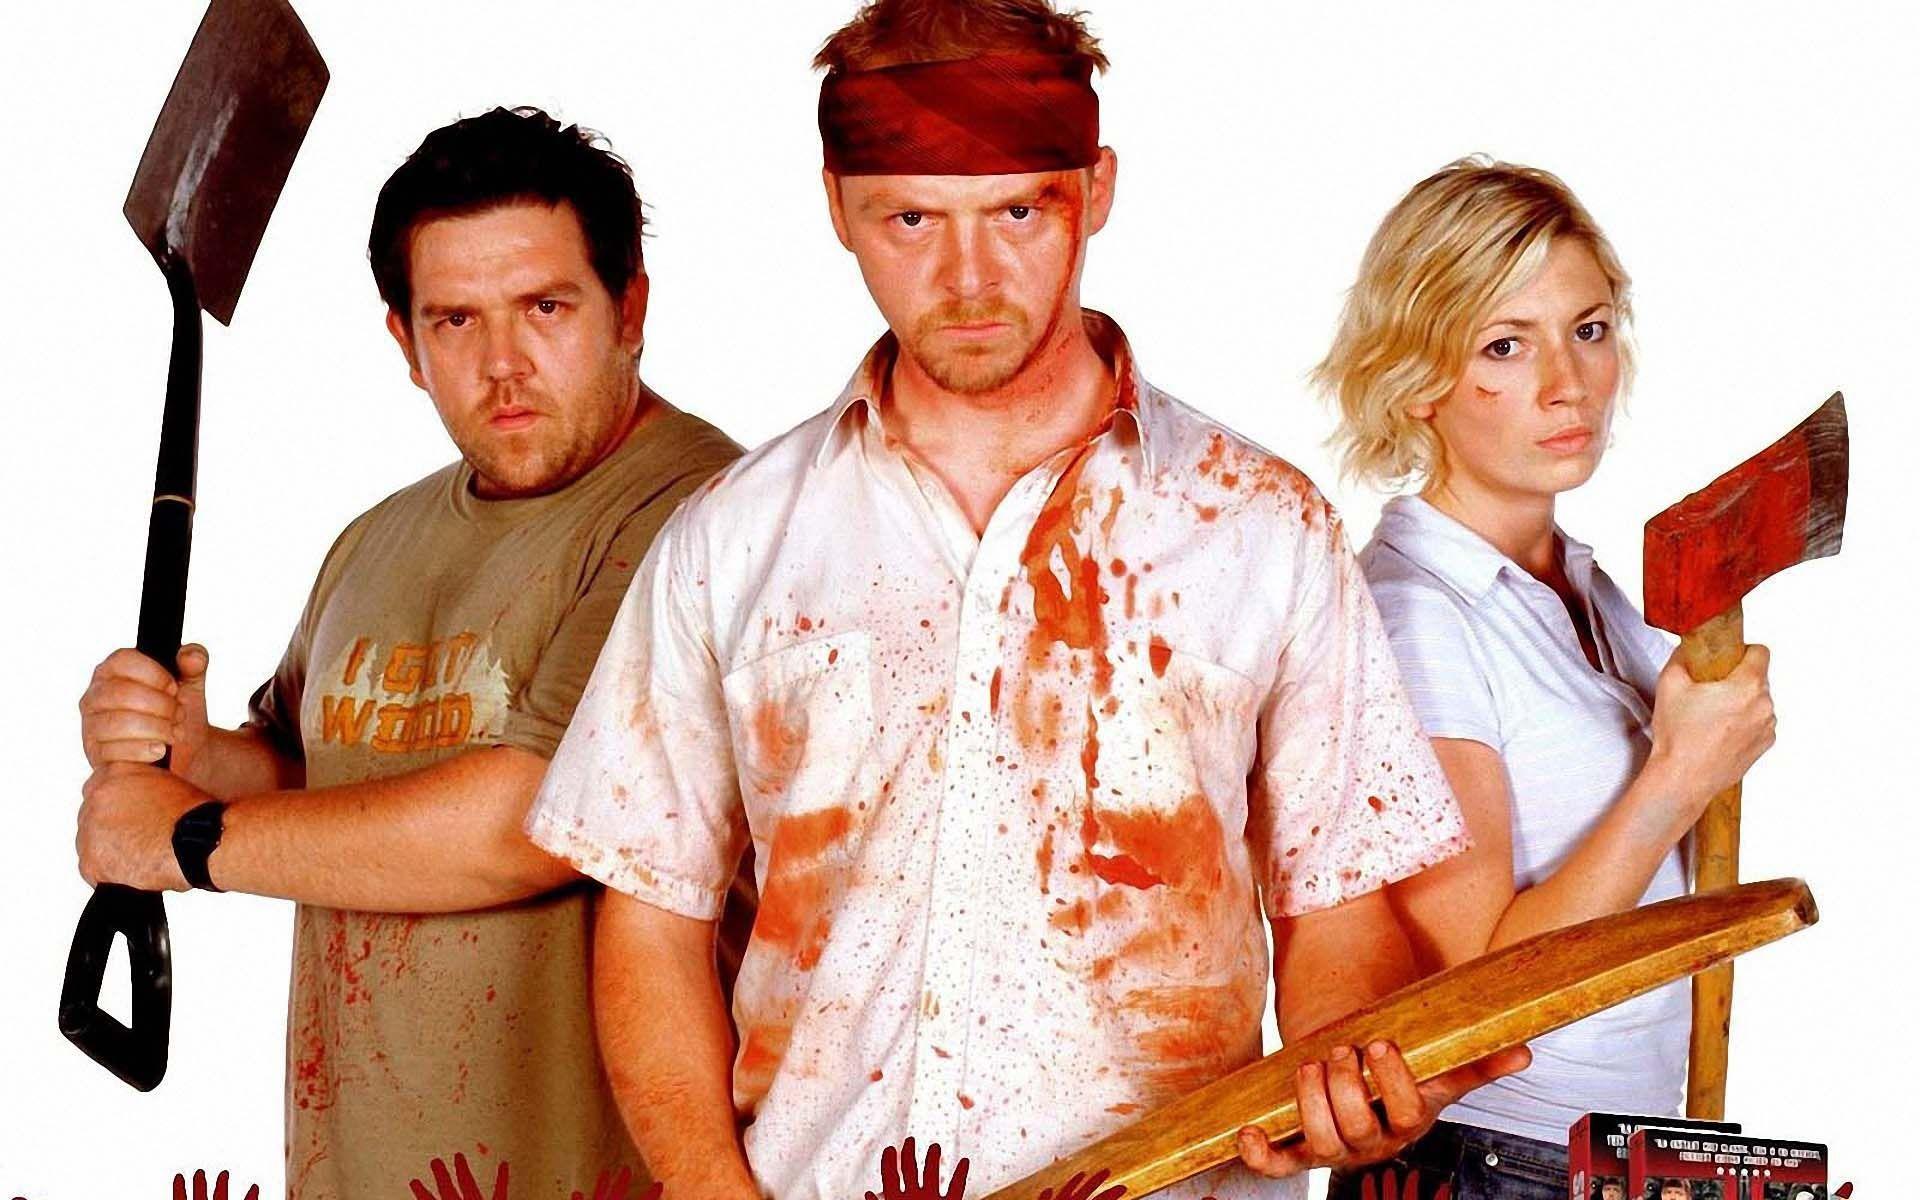 shaun of the dead. Shaun of the Dead Poster 1920x1200 Wallpaper